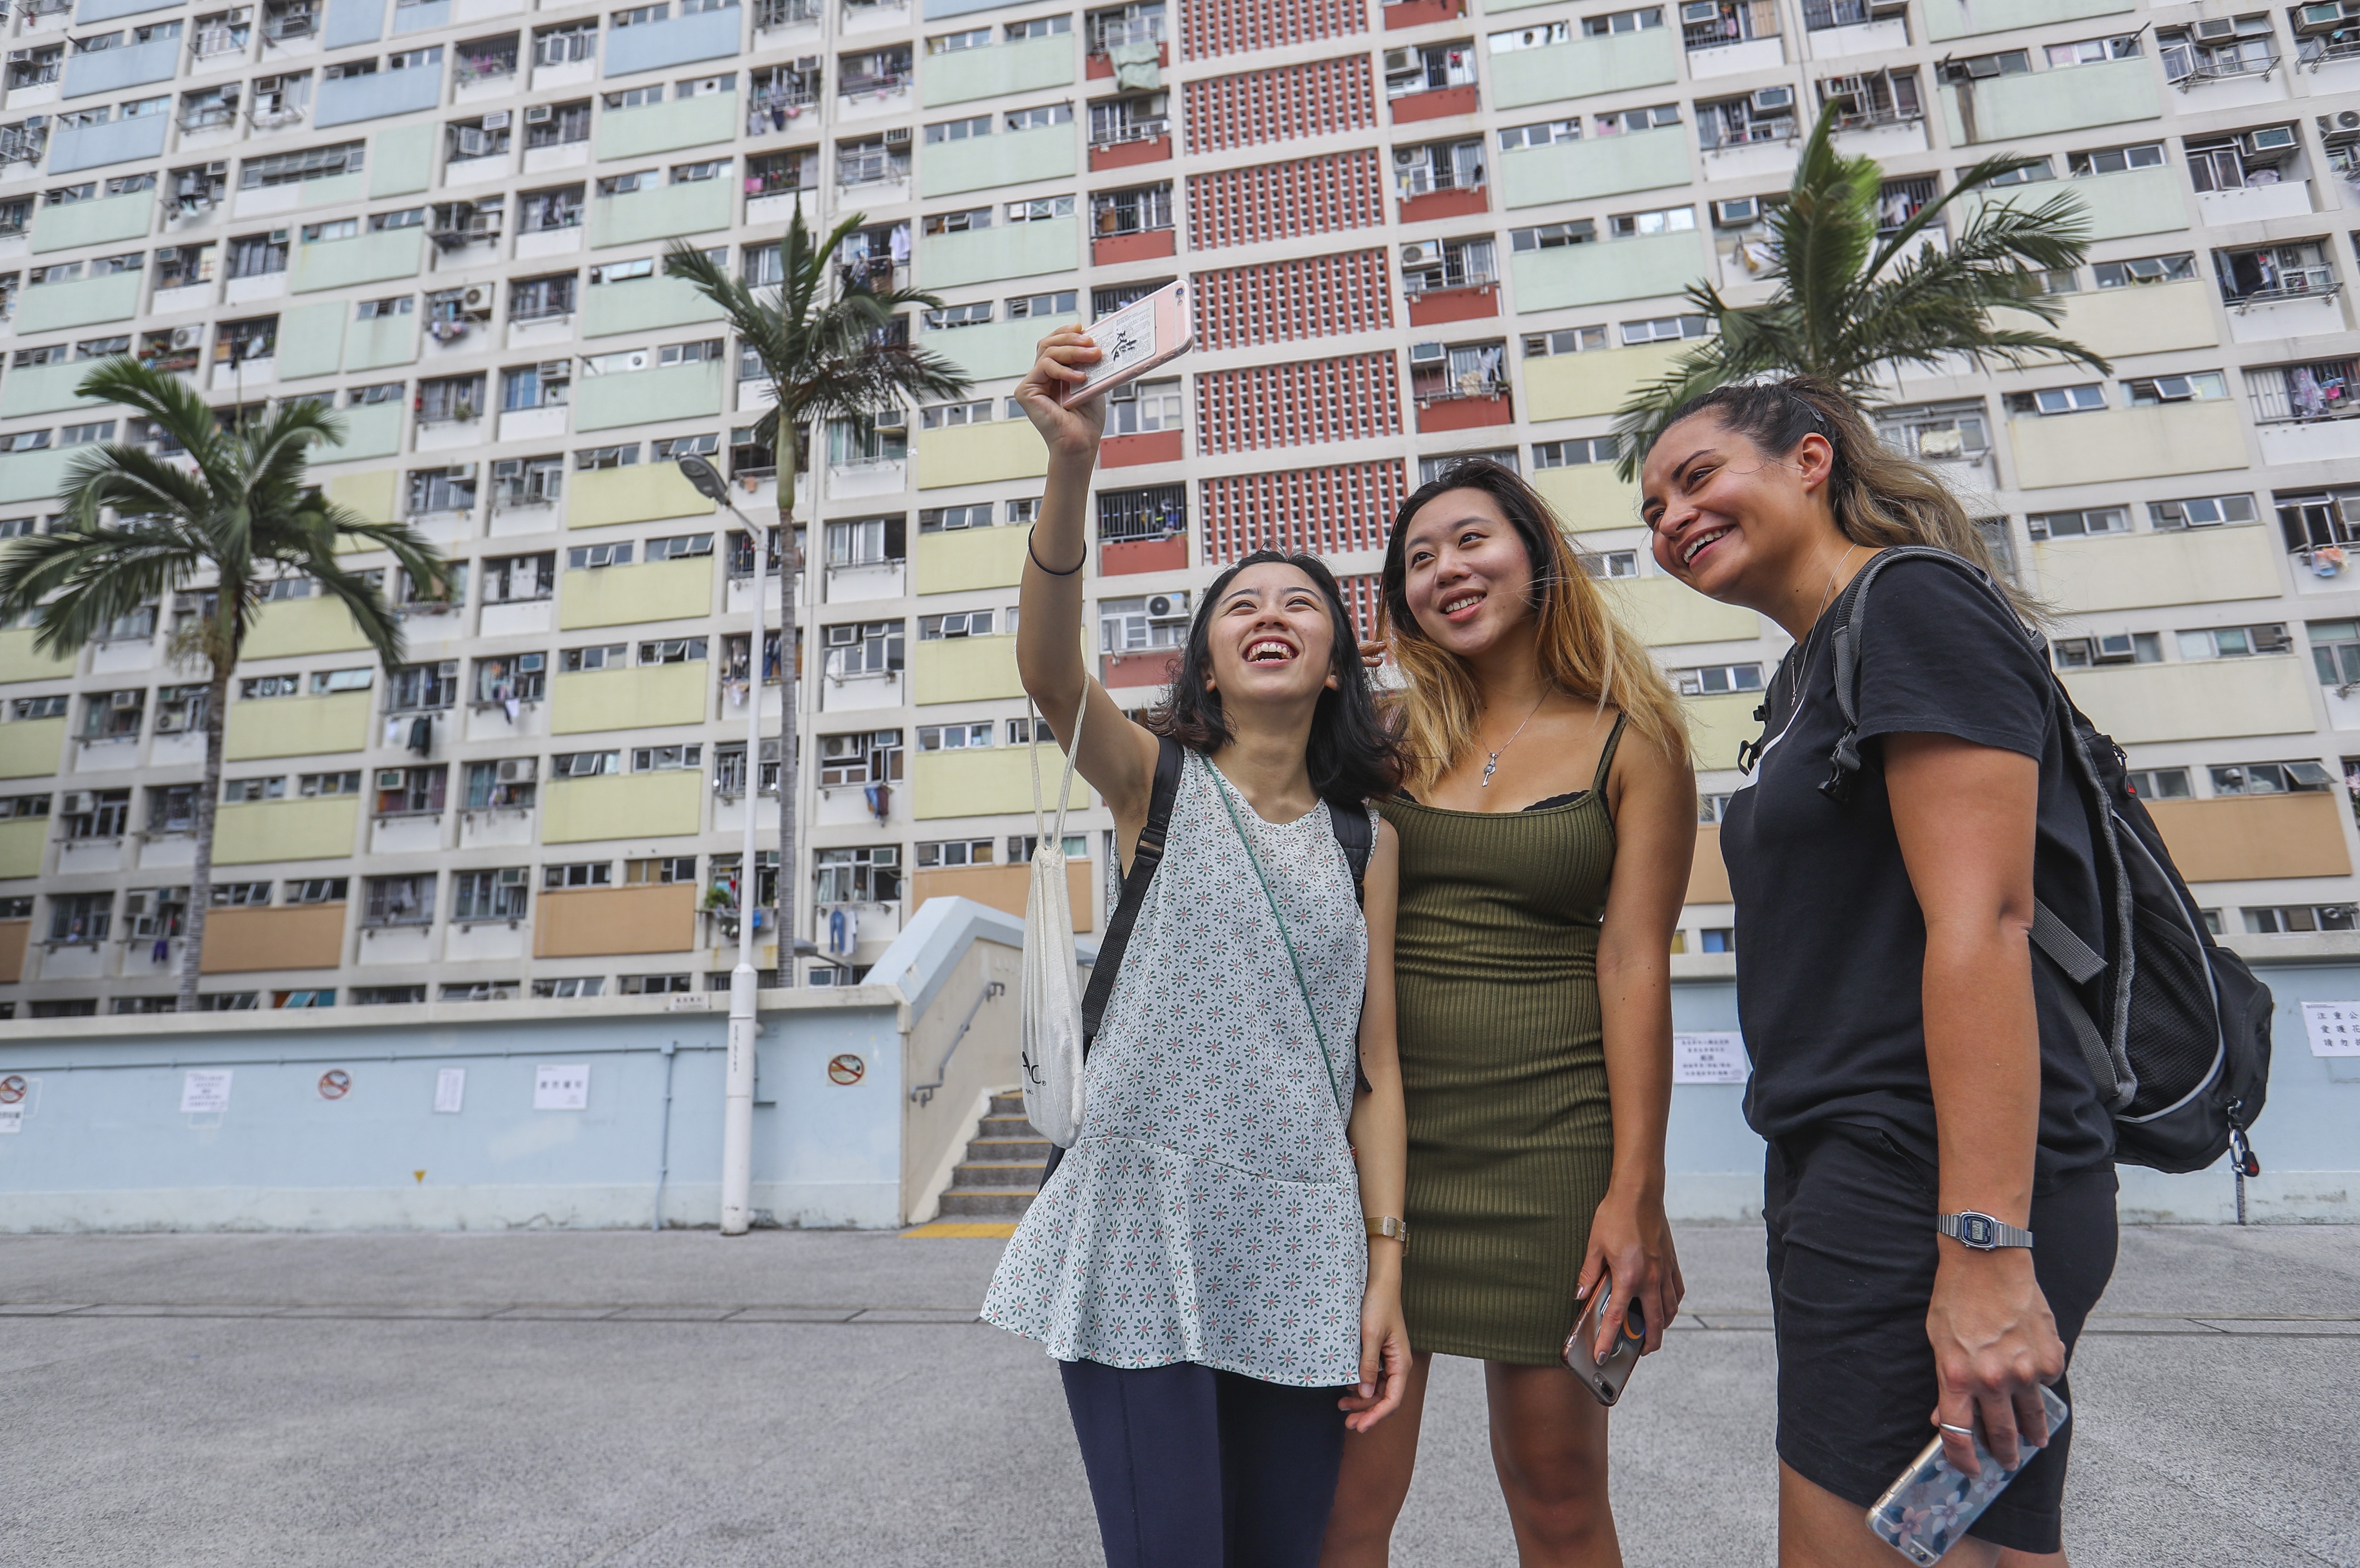 Choi Hung Estate in Hong Kong has become a popular Instagram hotspot because of its pastel colours and symmetrical lines. Photo: Edmond So